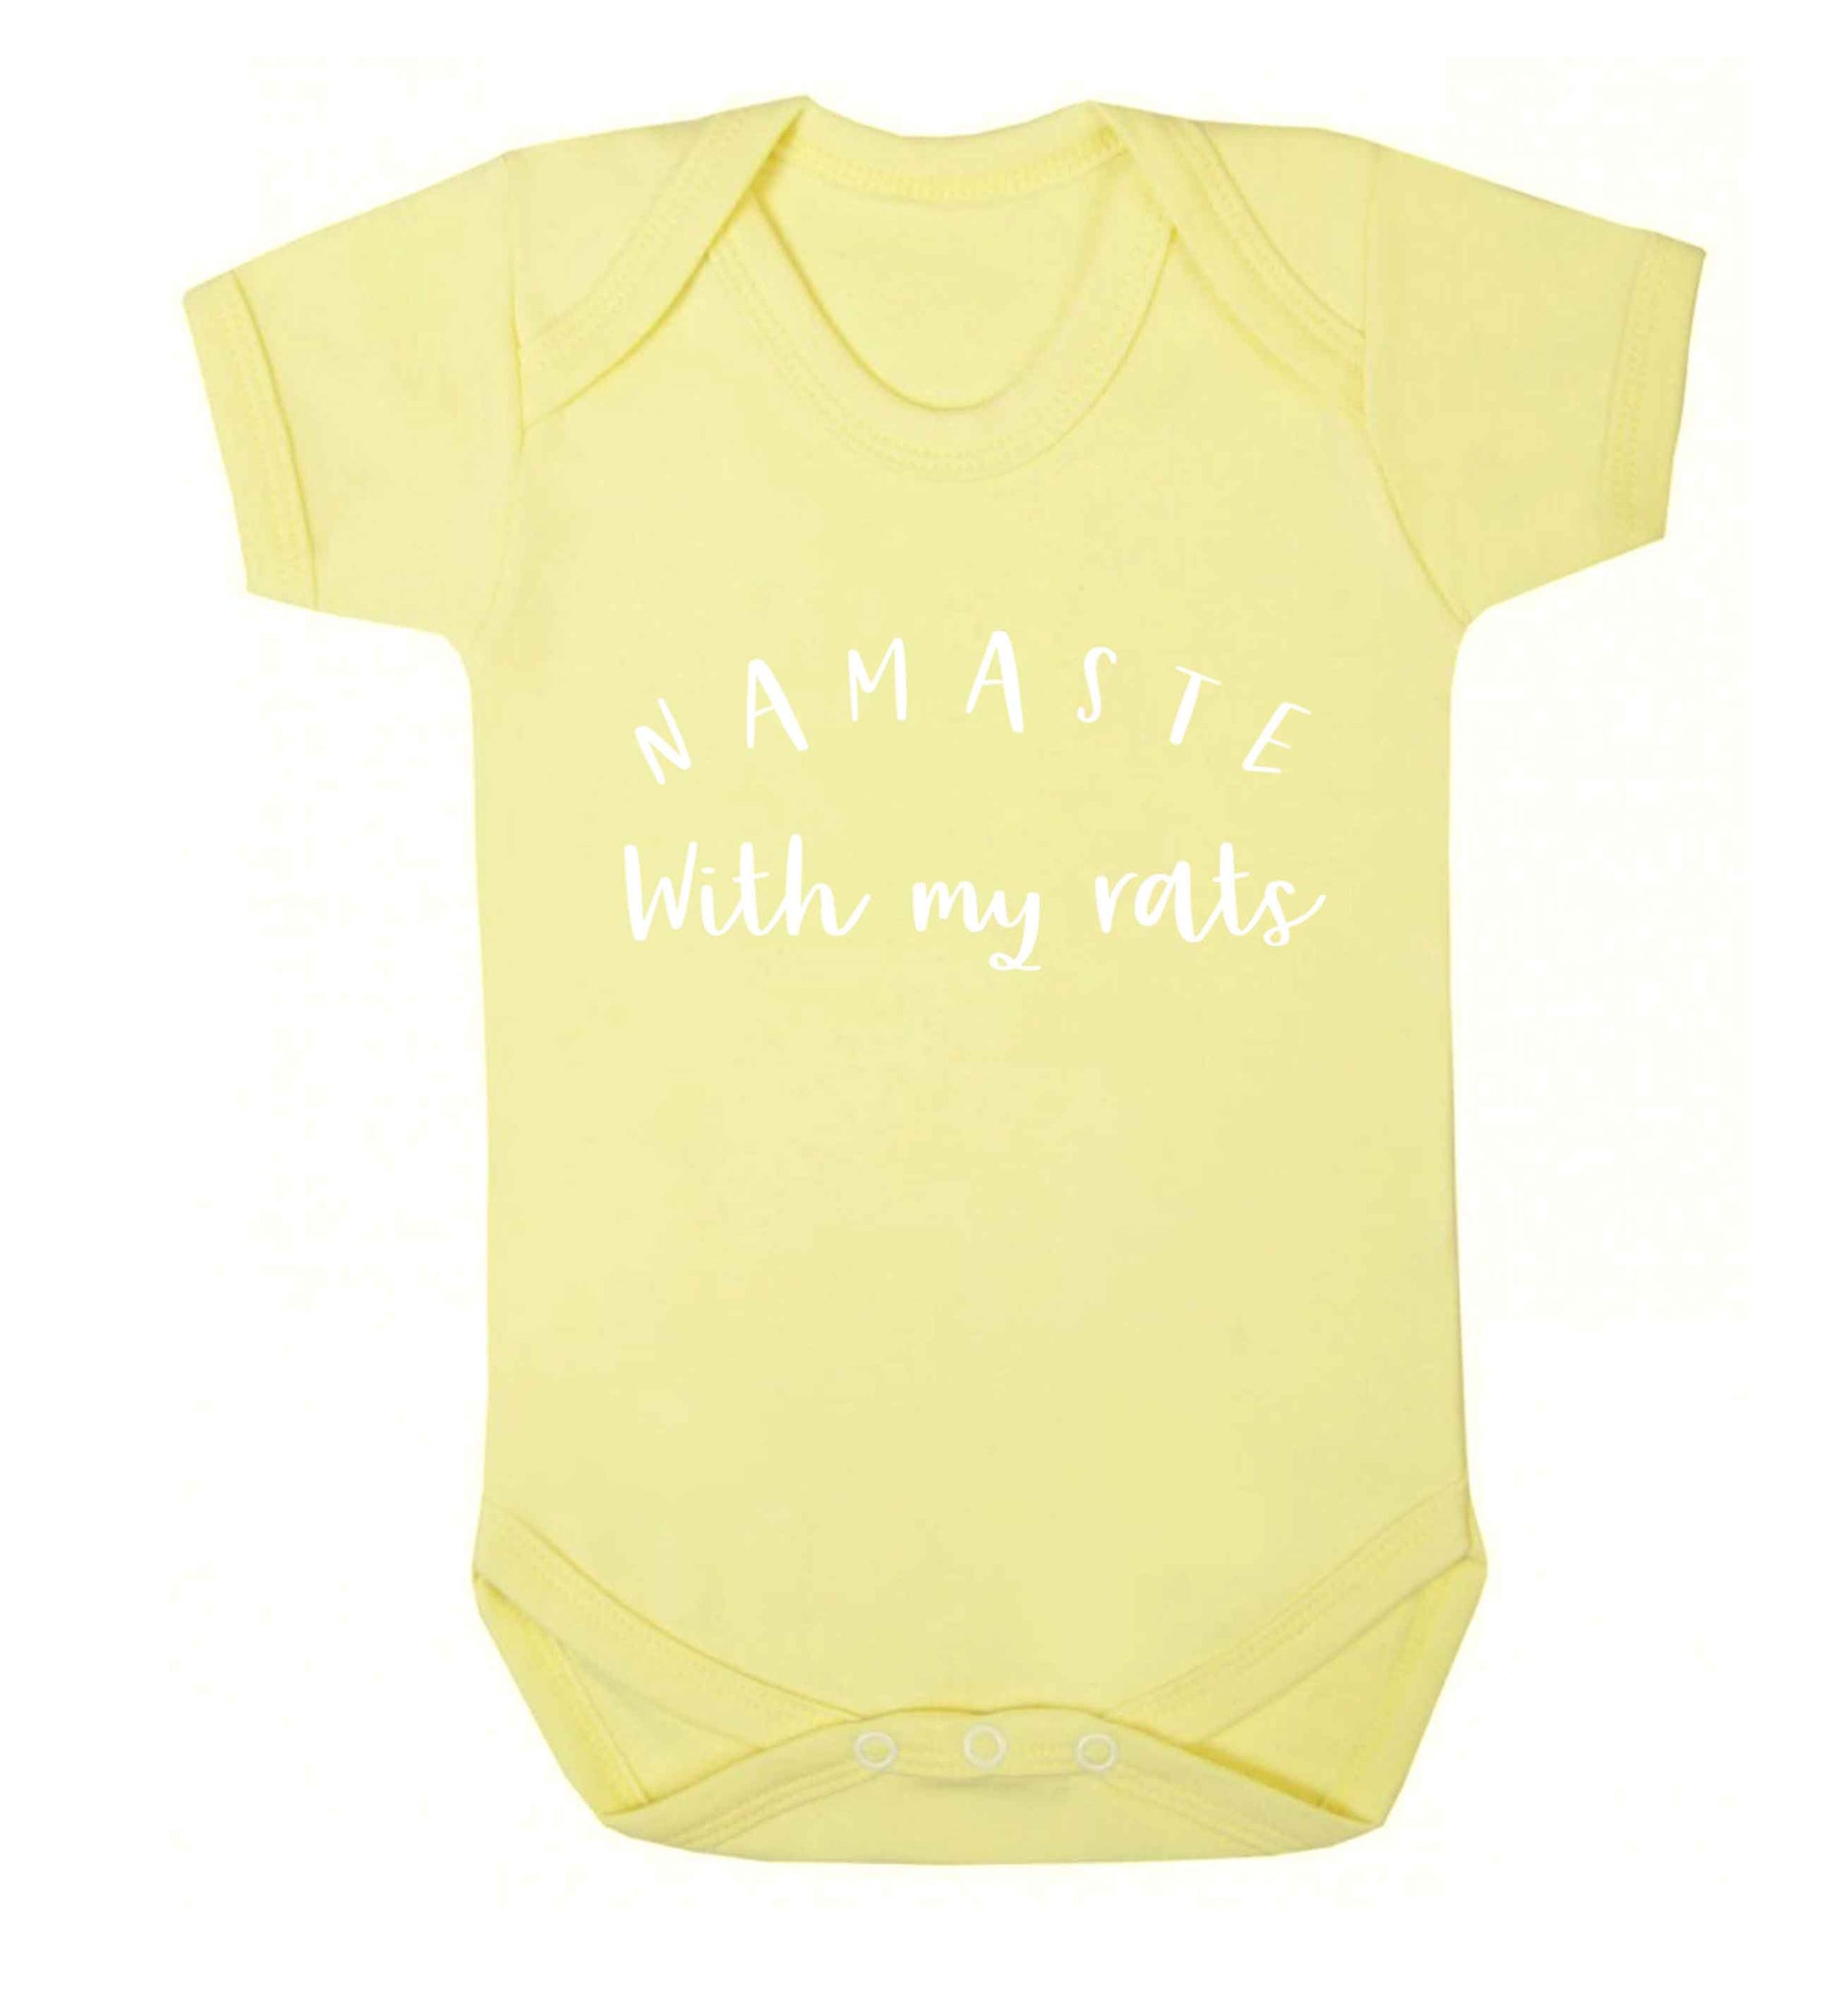 Namaste with my rats Baby Vest pale yellow 18-24 months